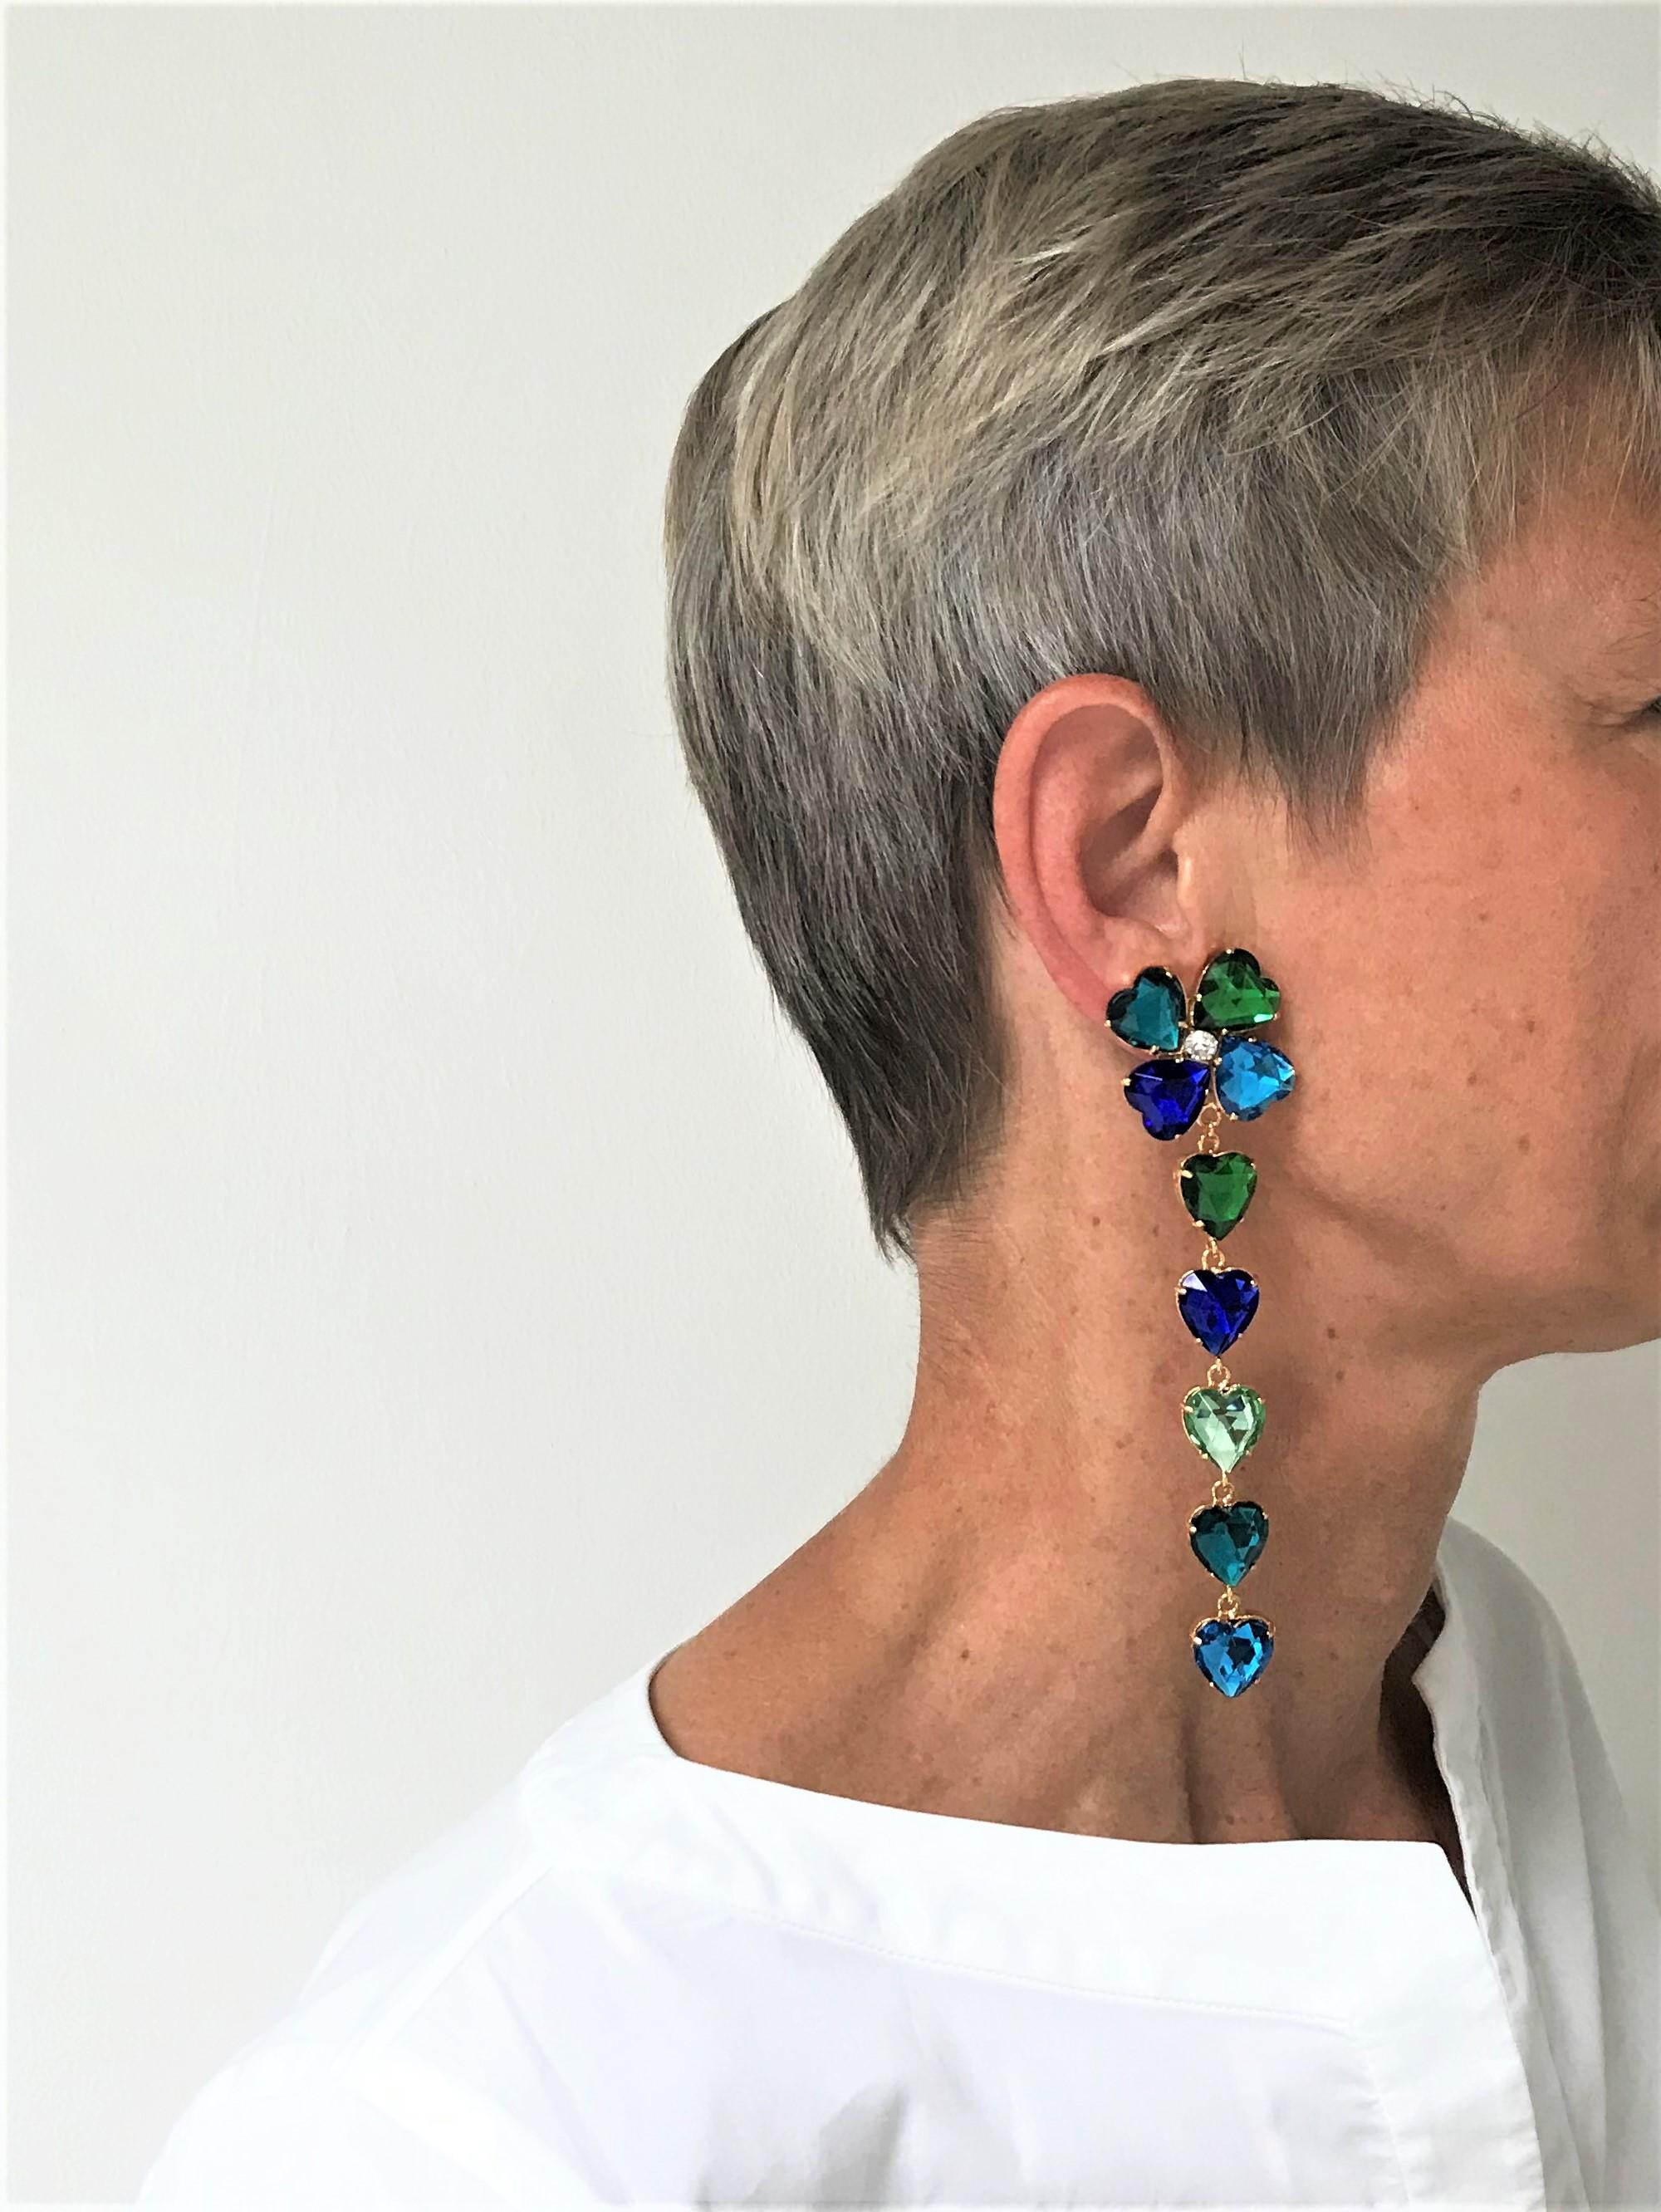 SHOULDER - CLUSTER CLIP-ON EARRINGS ARE VERY TRENDING!
Gorgeous YSL ear clips made from 5 different colored cut rhinestone hearts.  4 hearts in different colors make a shamrock at the top. The remaining 5 hearts hang loosely on the clover leaf and